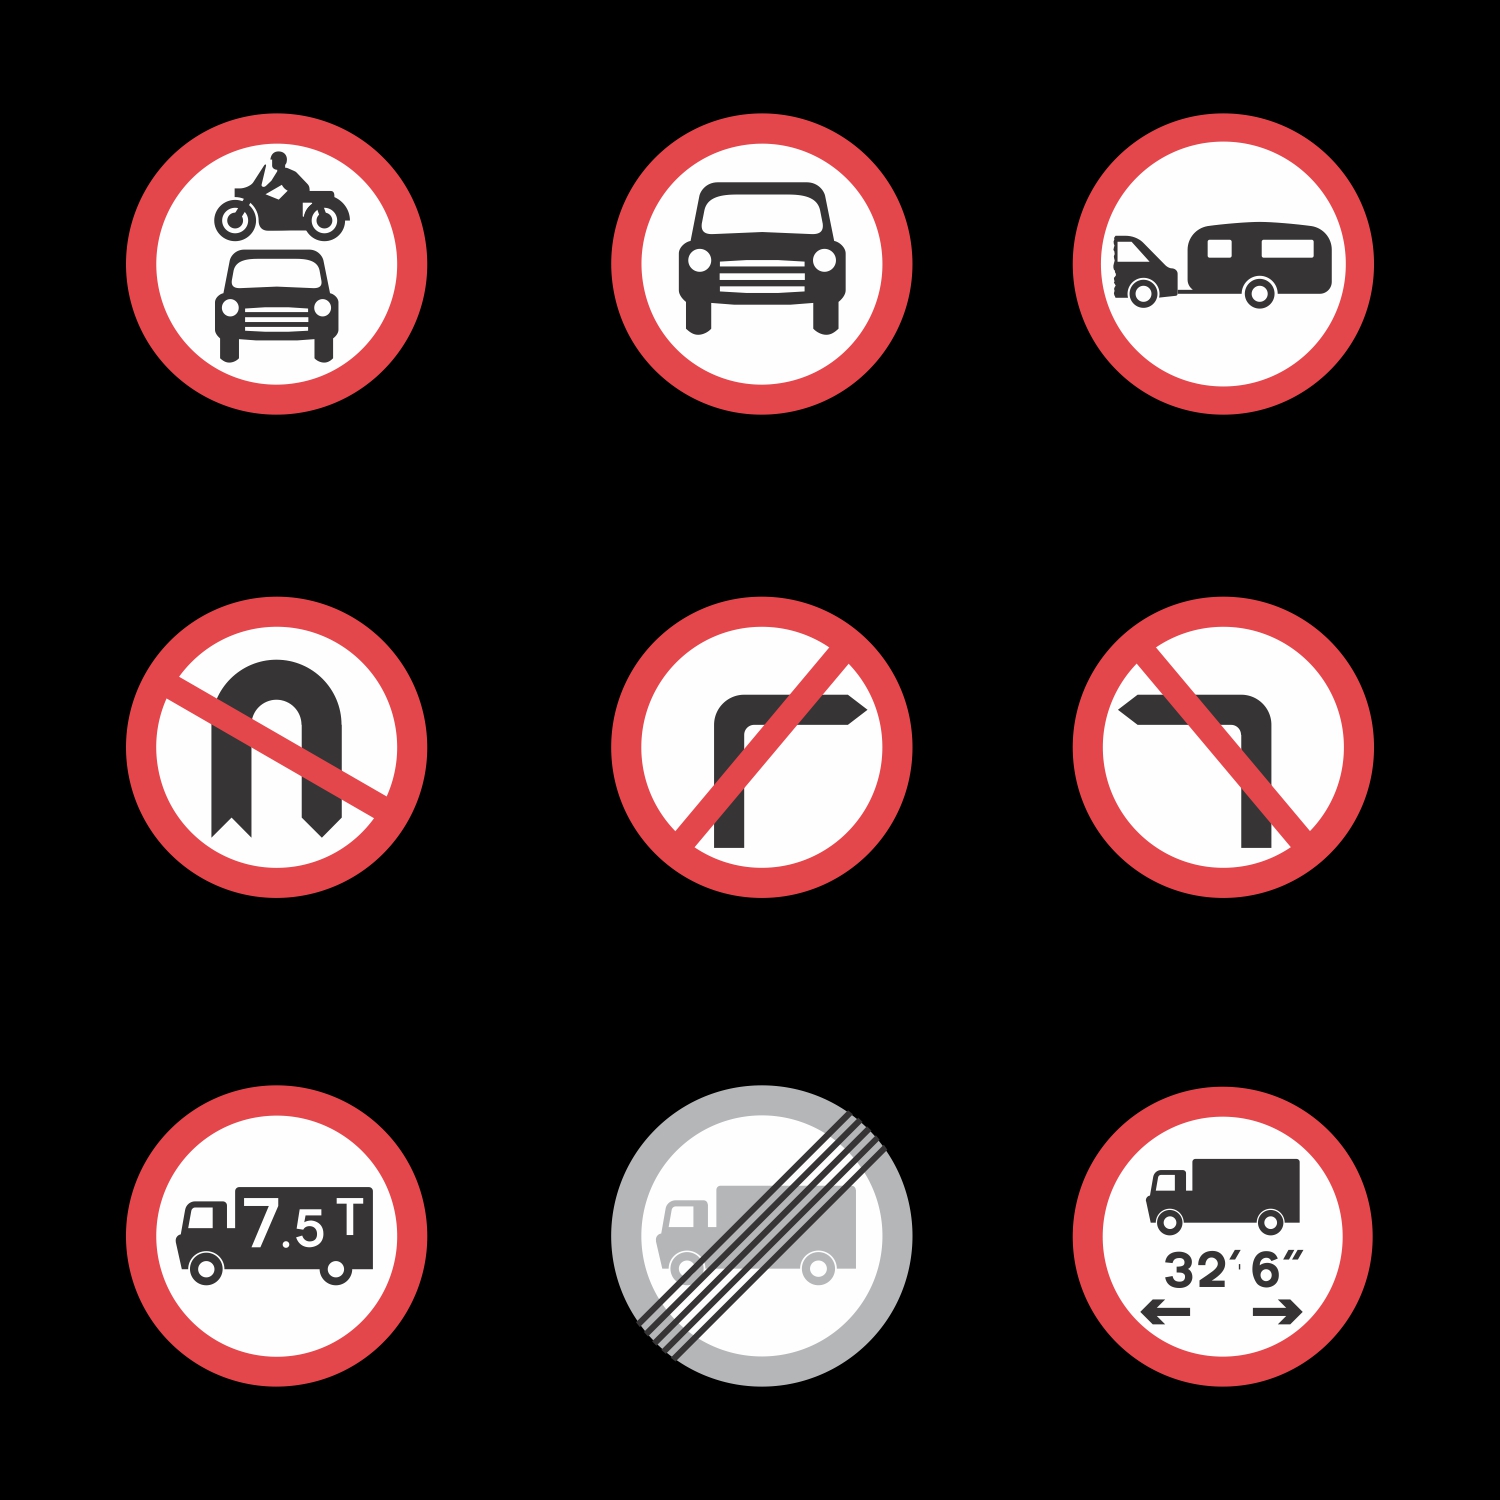 Free vector A vector collection of circular road traffic signs CDR file download for free